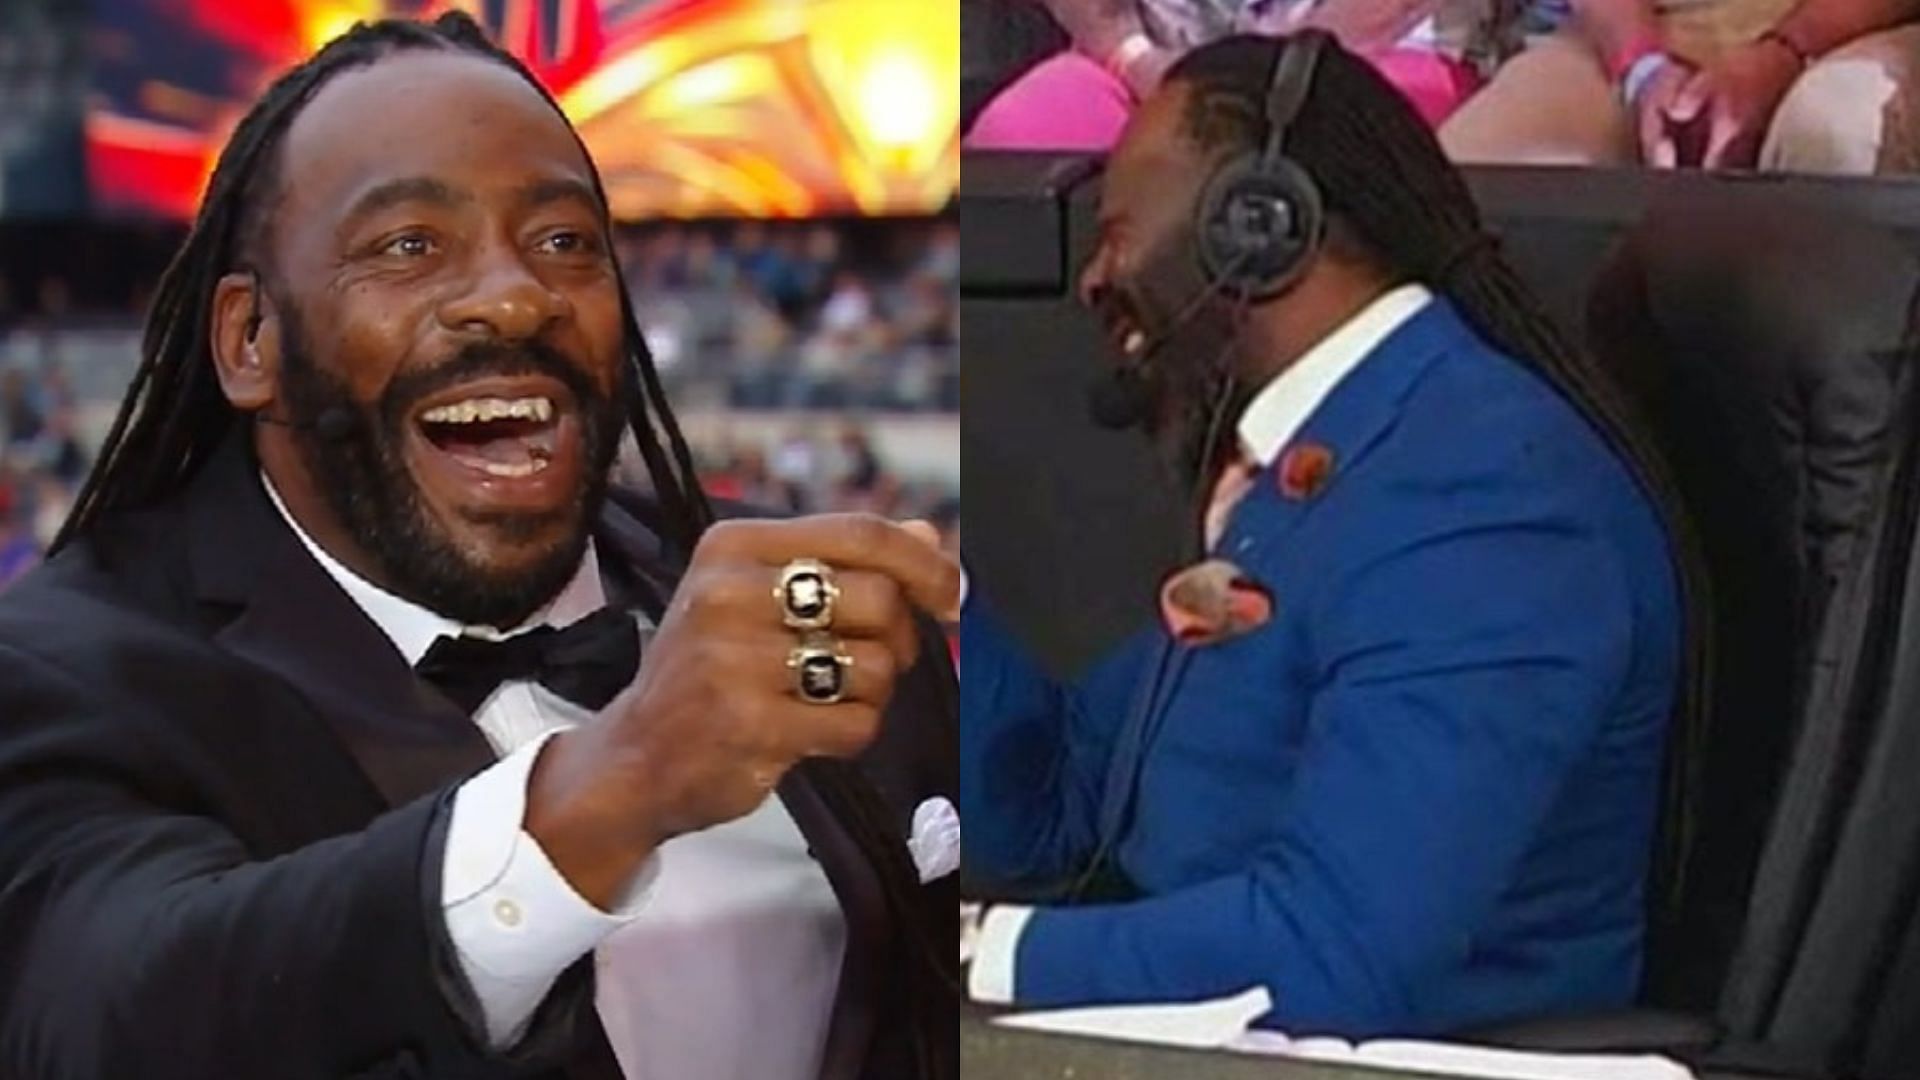 Booker T was in tears after a WWE star